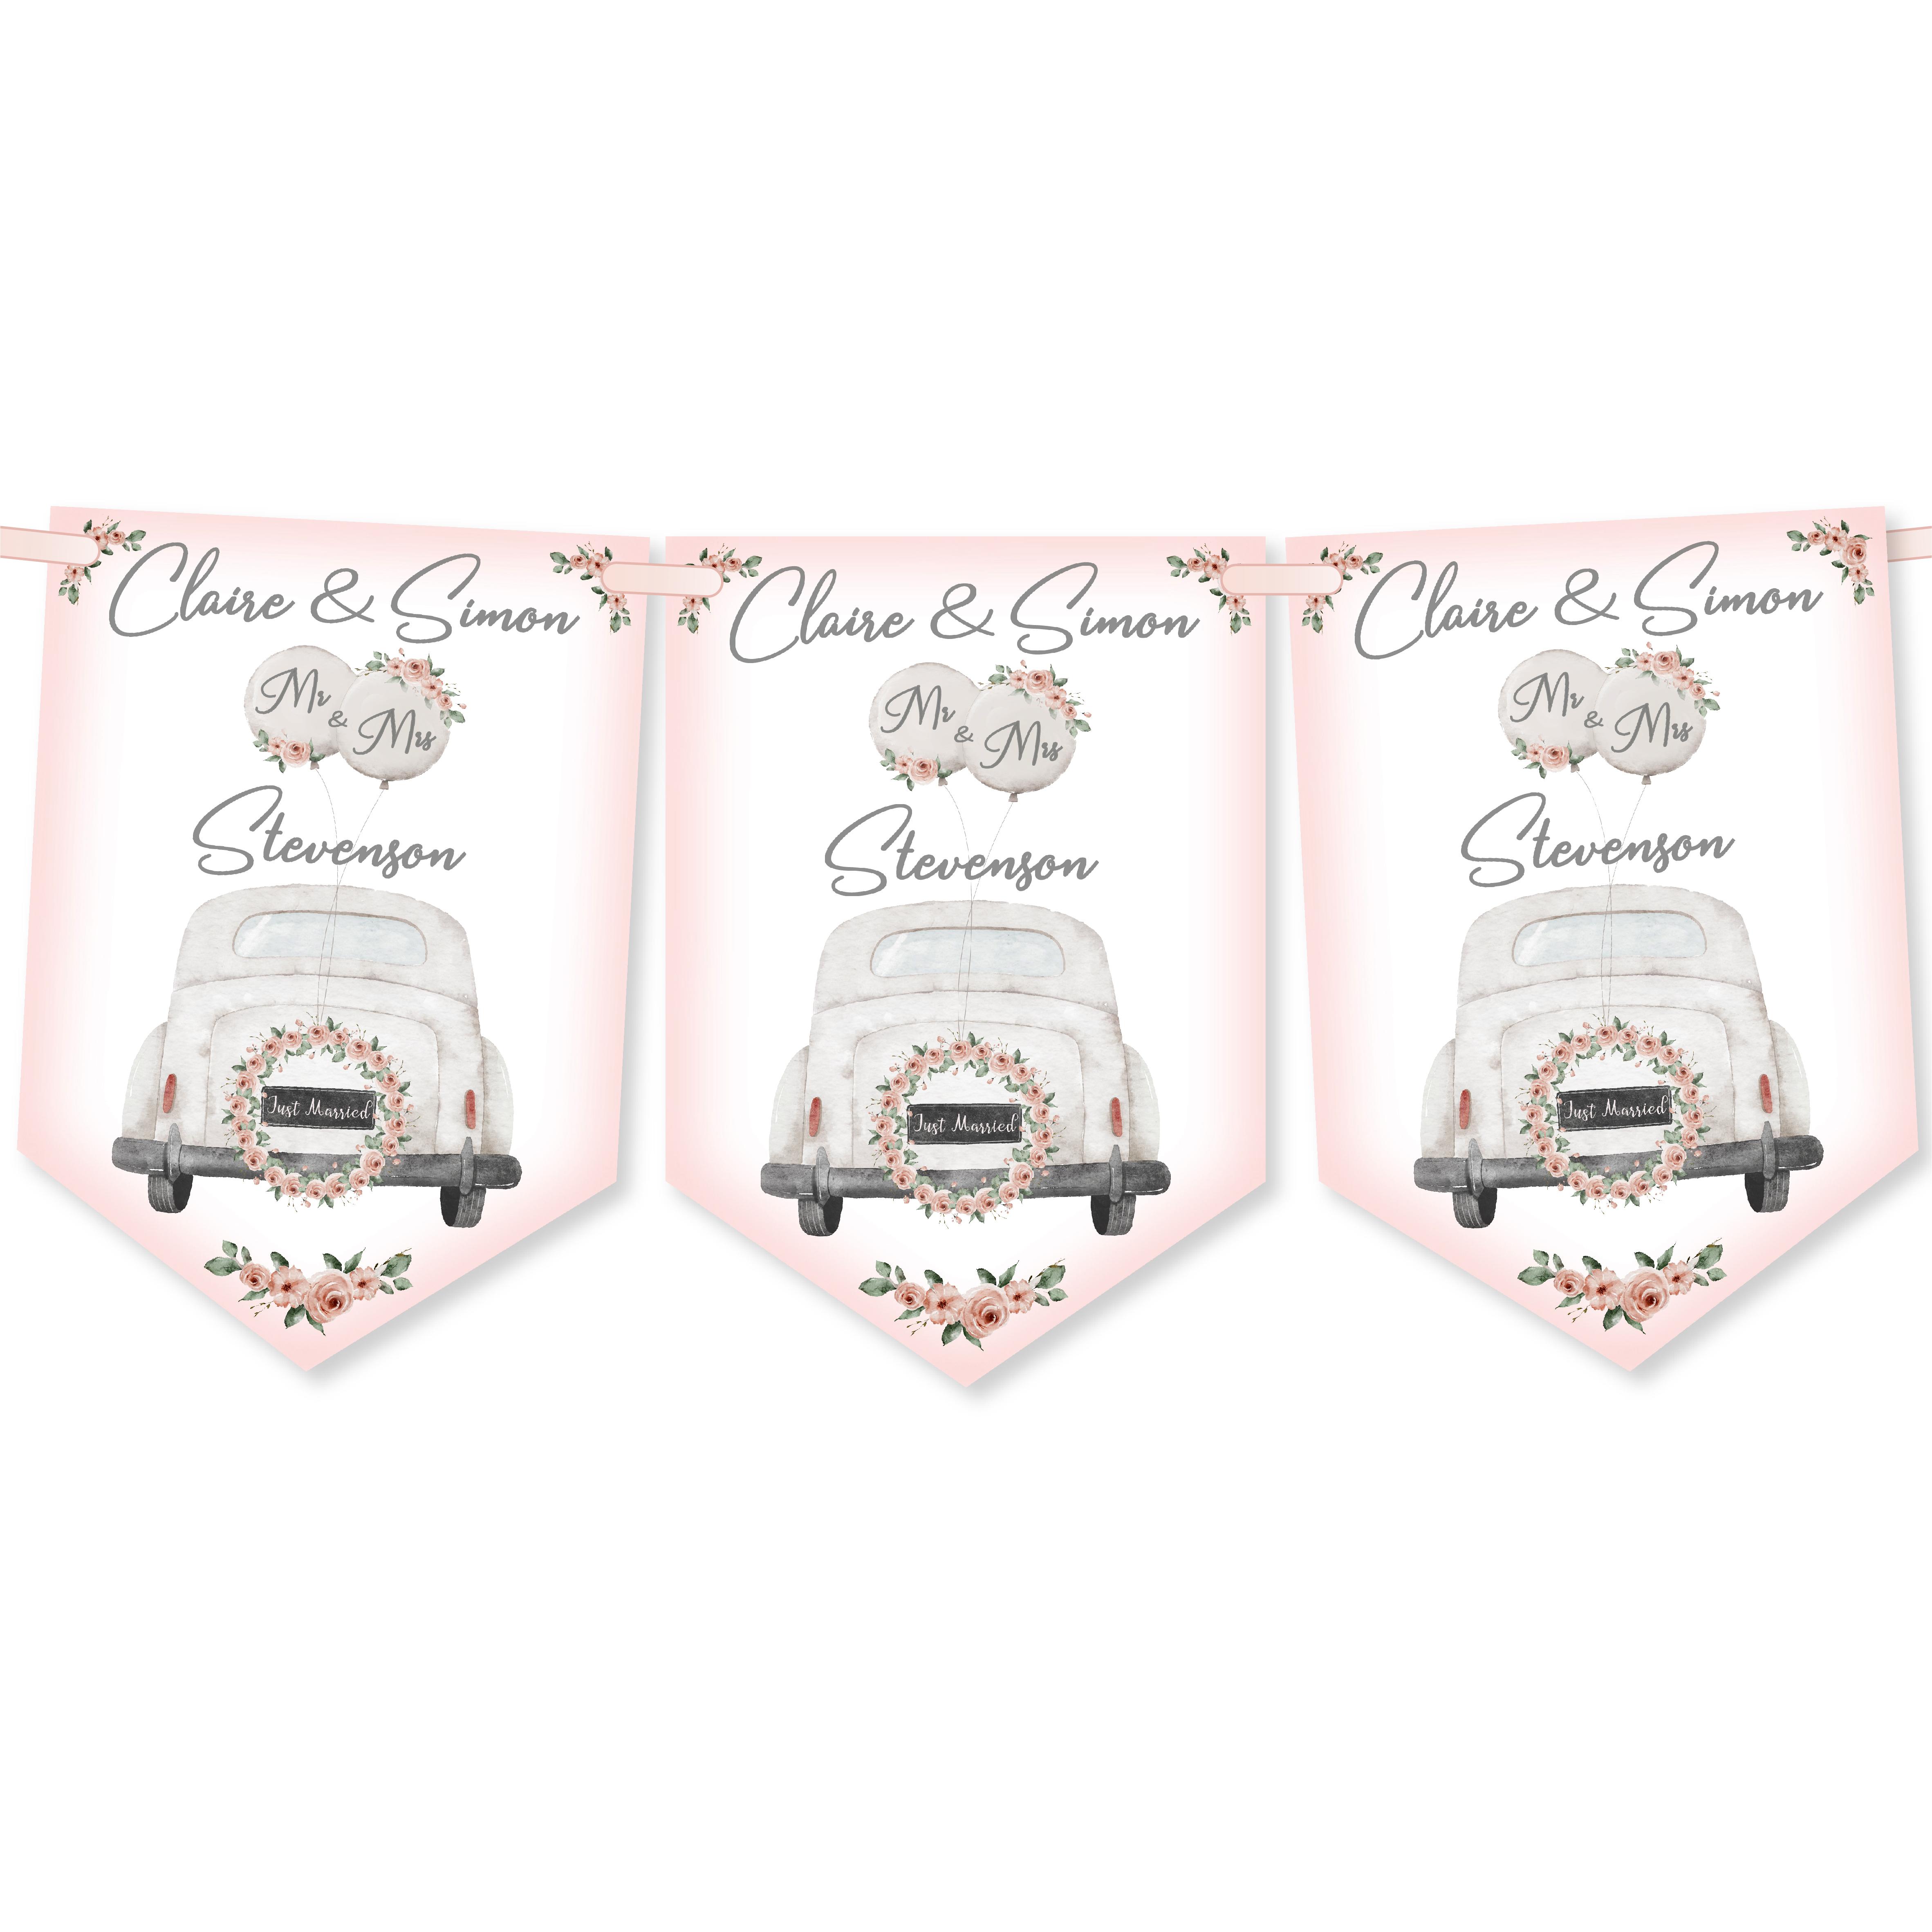 Wedding banner,wedding bunting,great for your wedding venue decoration.Personalised